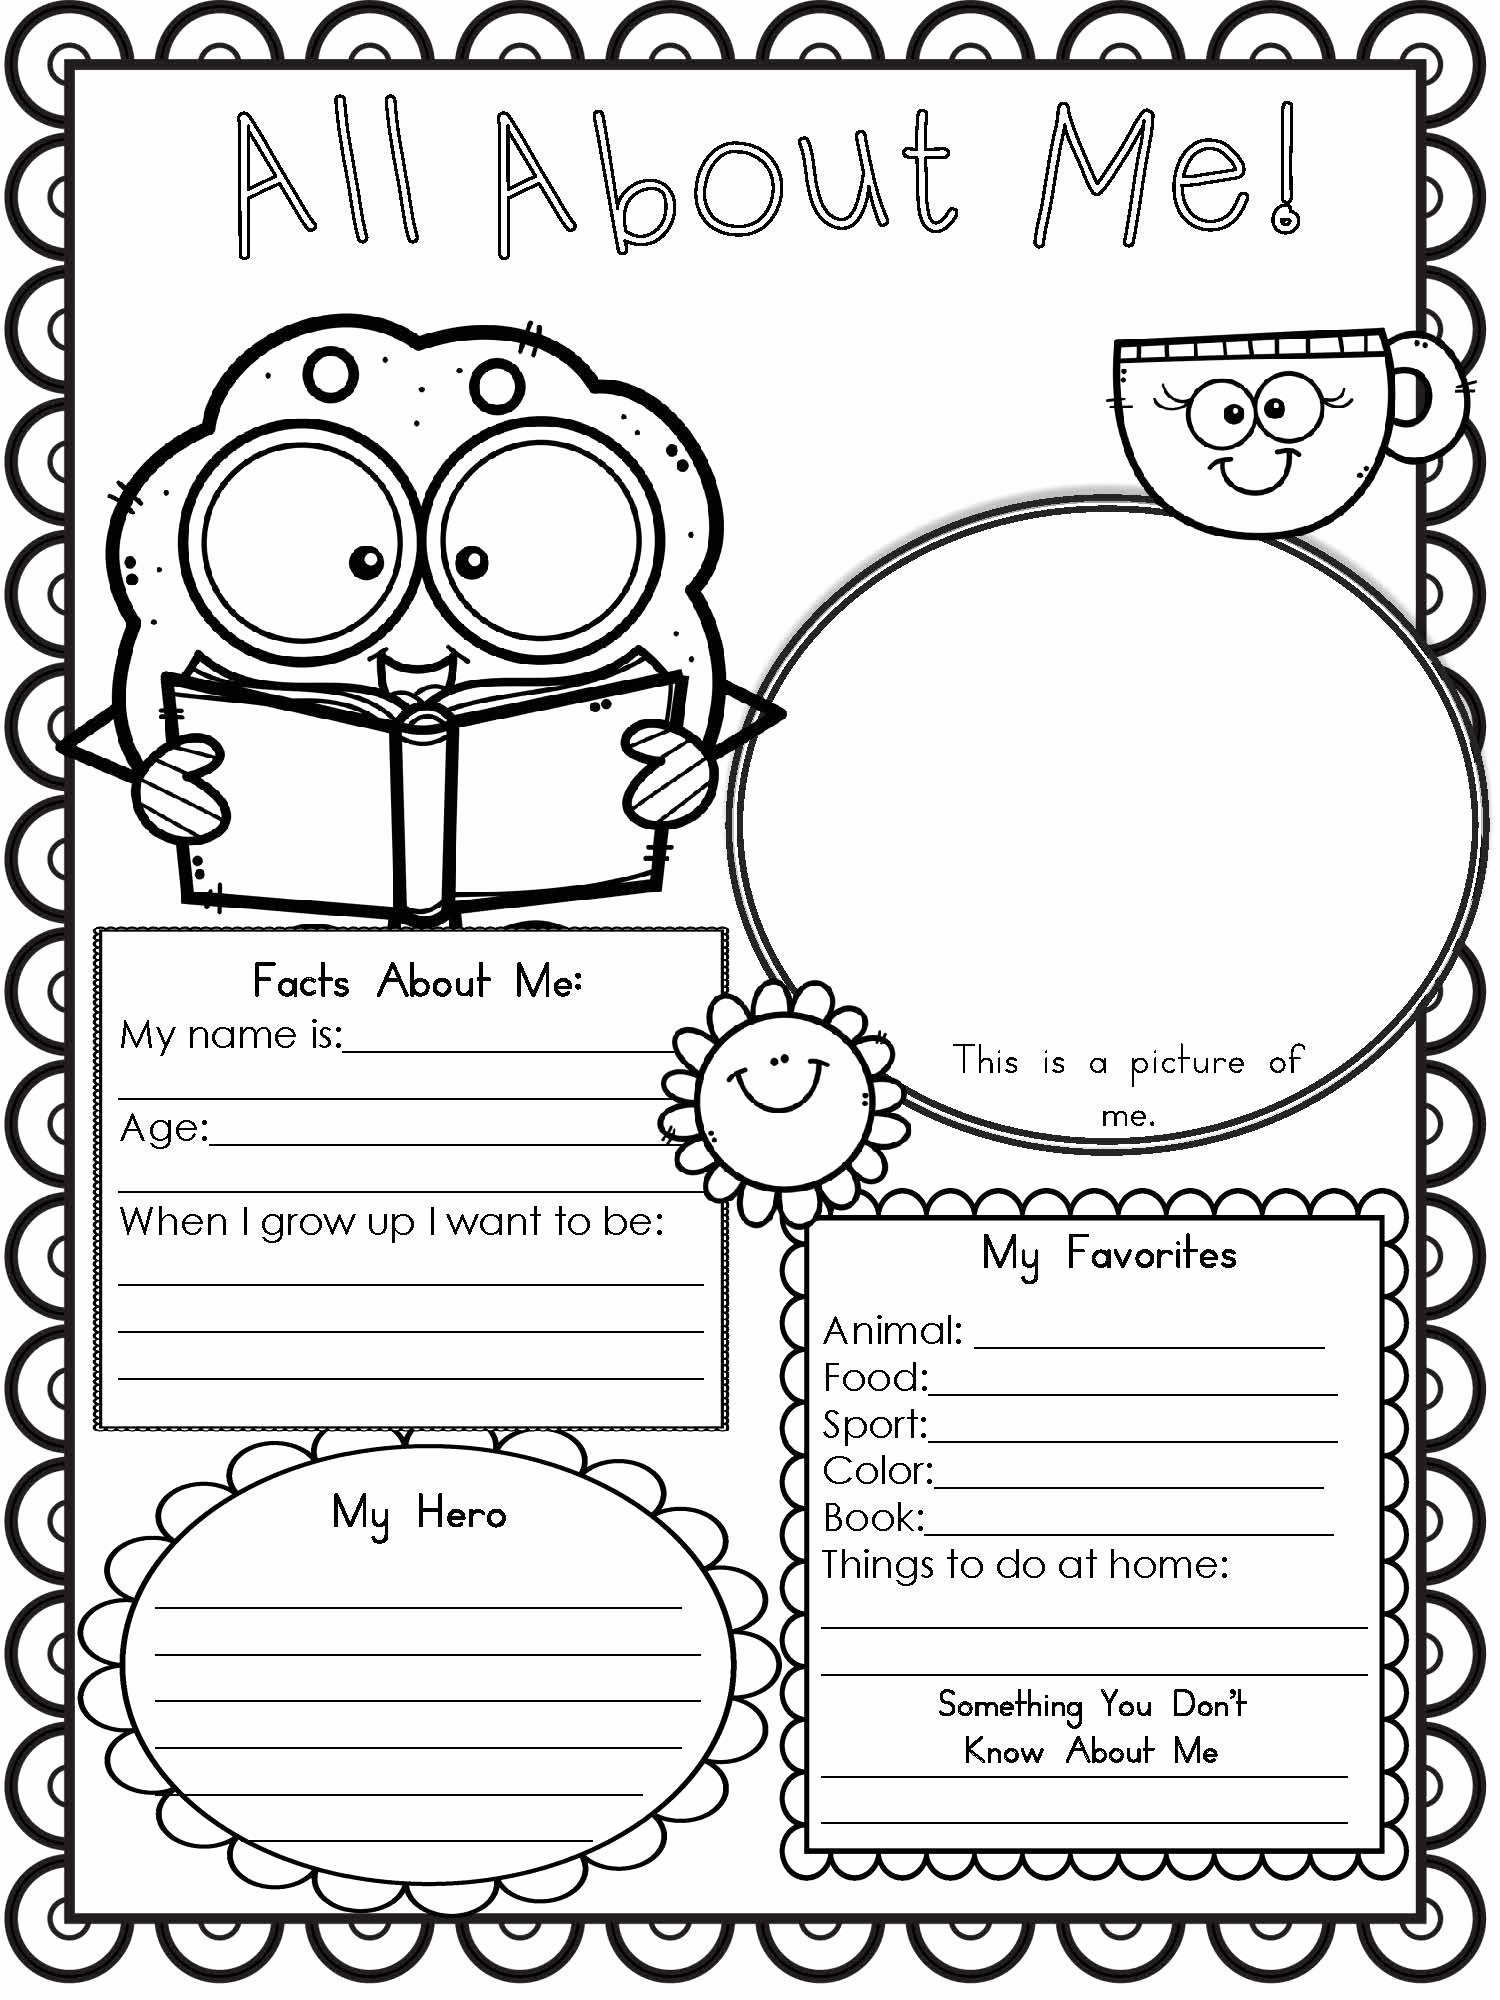 All About Me Worksheet Pdf Inspirational Free Printable All About Me Worksheet Modern Homeschool